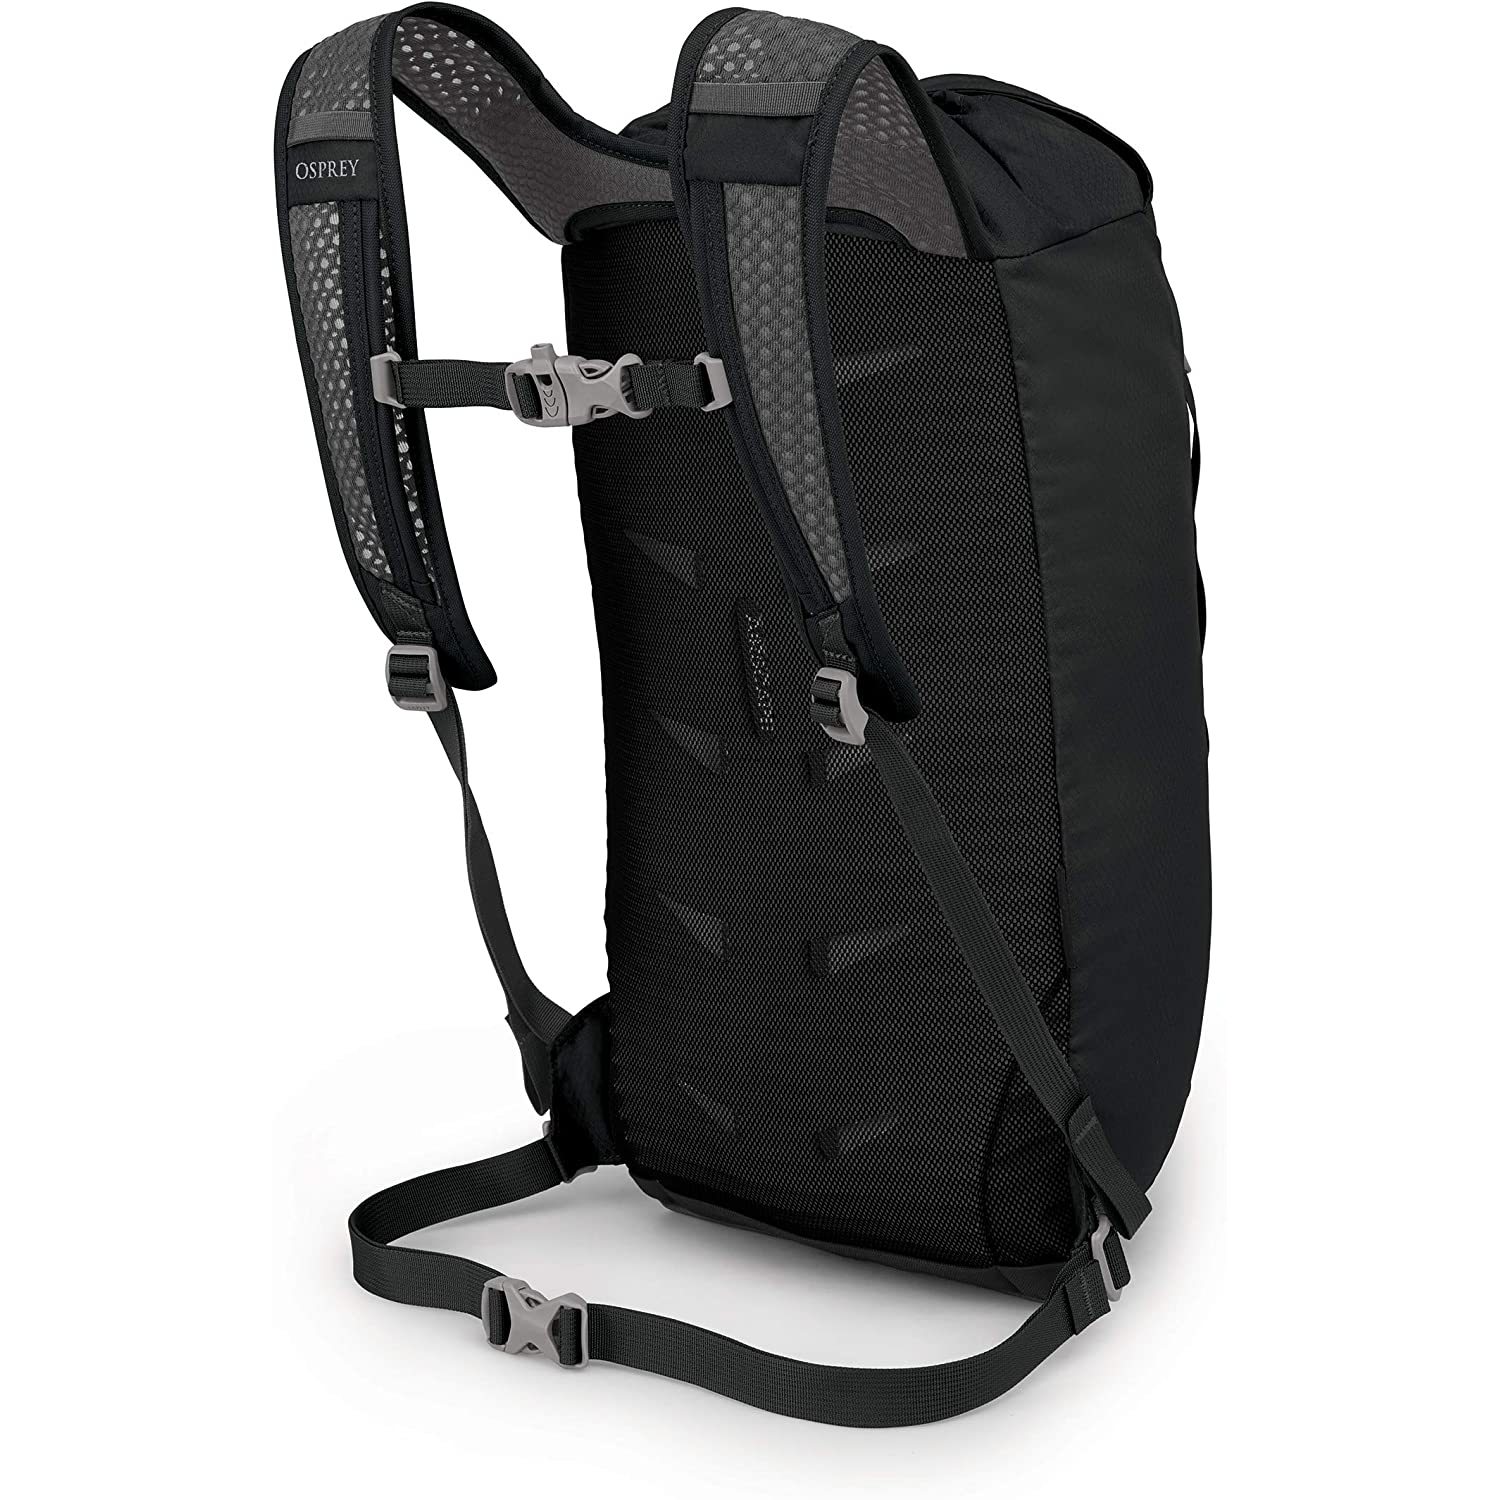 Daylite Cinch Backpack , Black, Top-loading access with cinch closing system - image 3 of 7